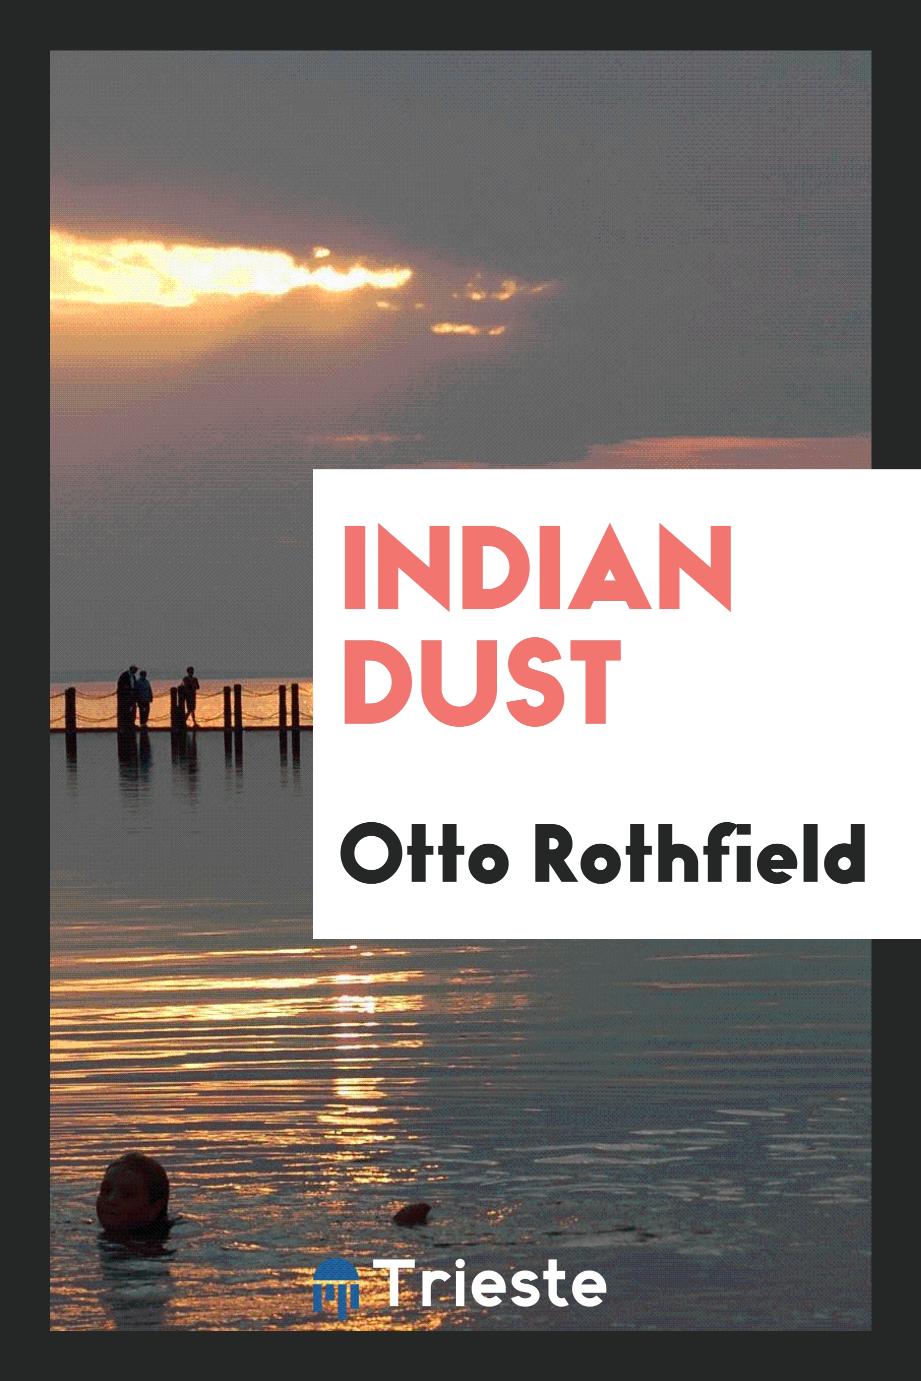 Indian dust